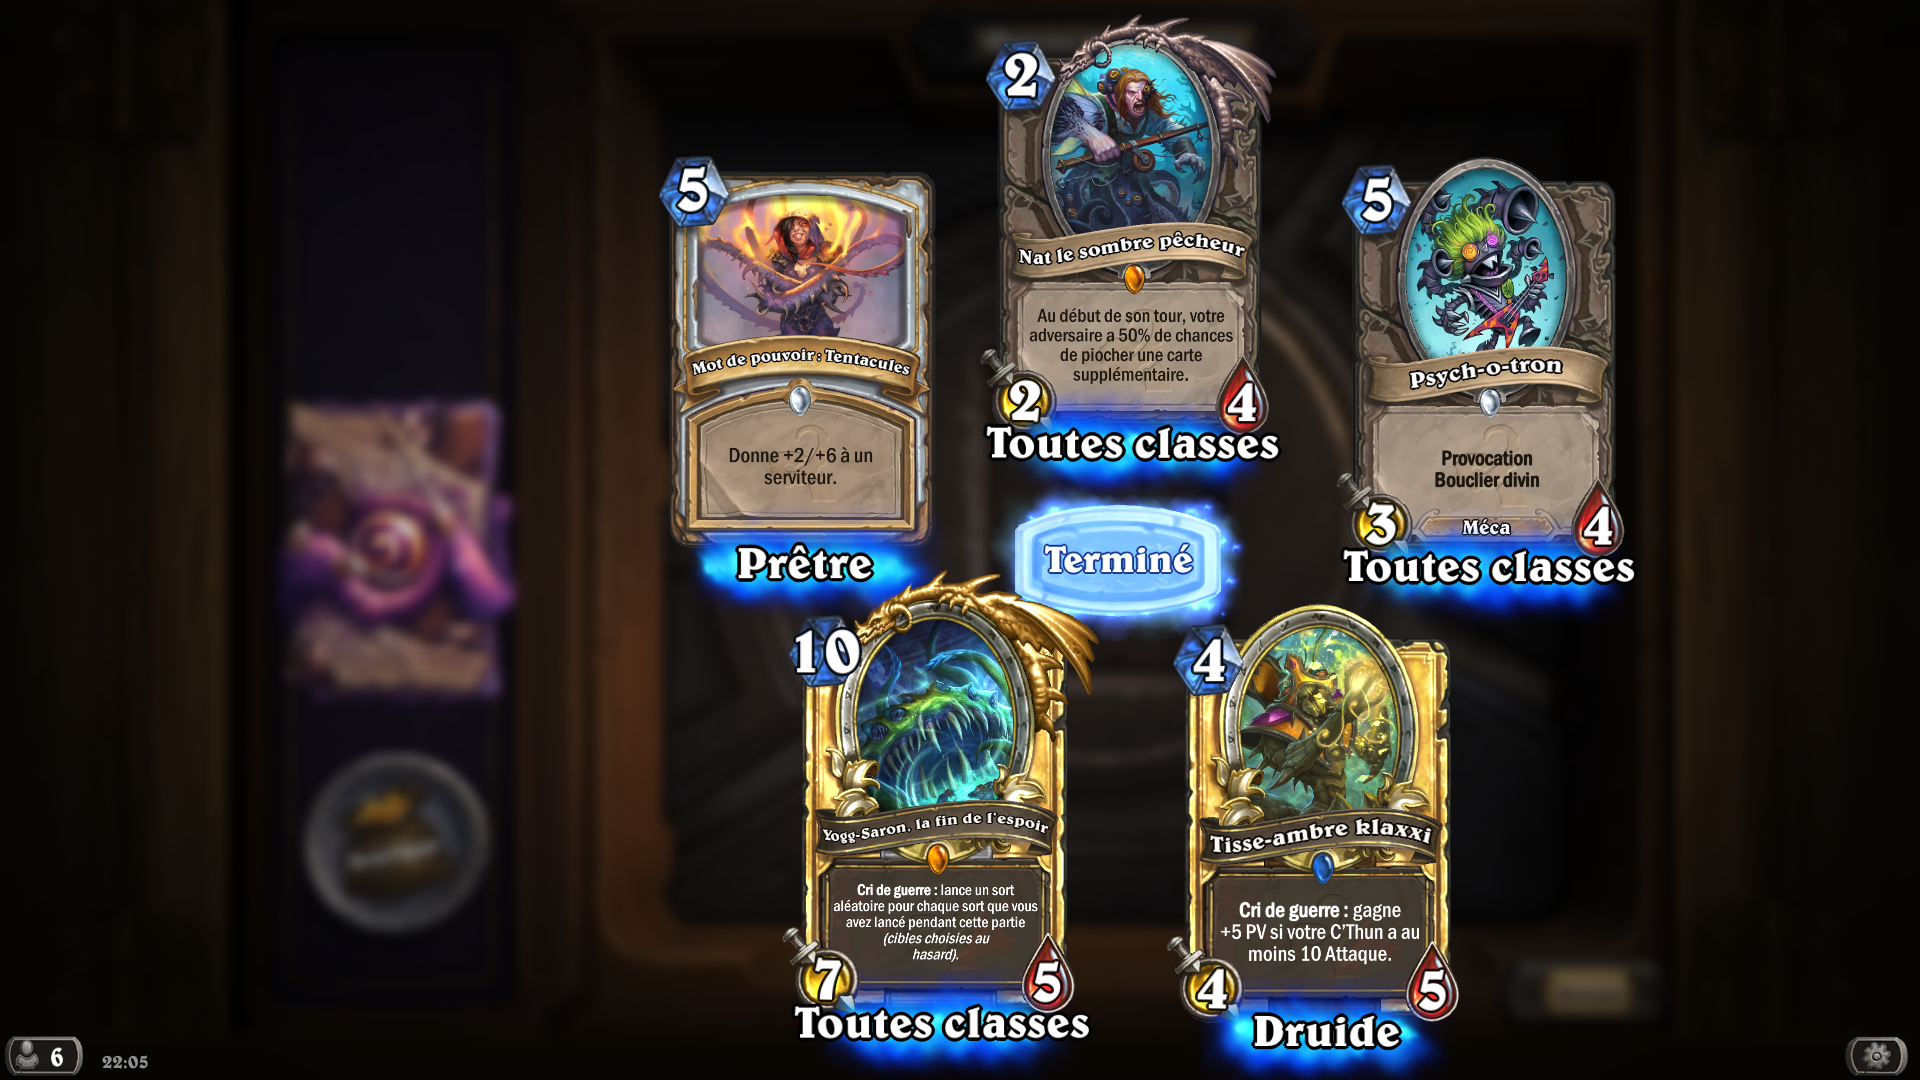 Nom : Hearthstone Screenshot 05-17-16 22.05.07.png
Affichages : 431
Taille : 1,76 Mo